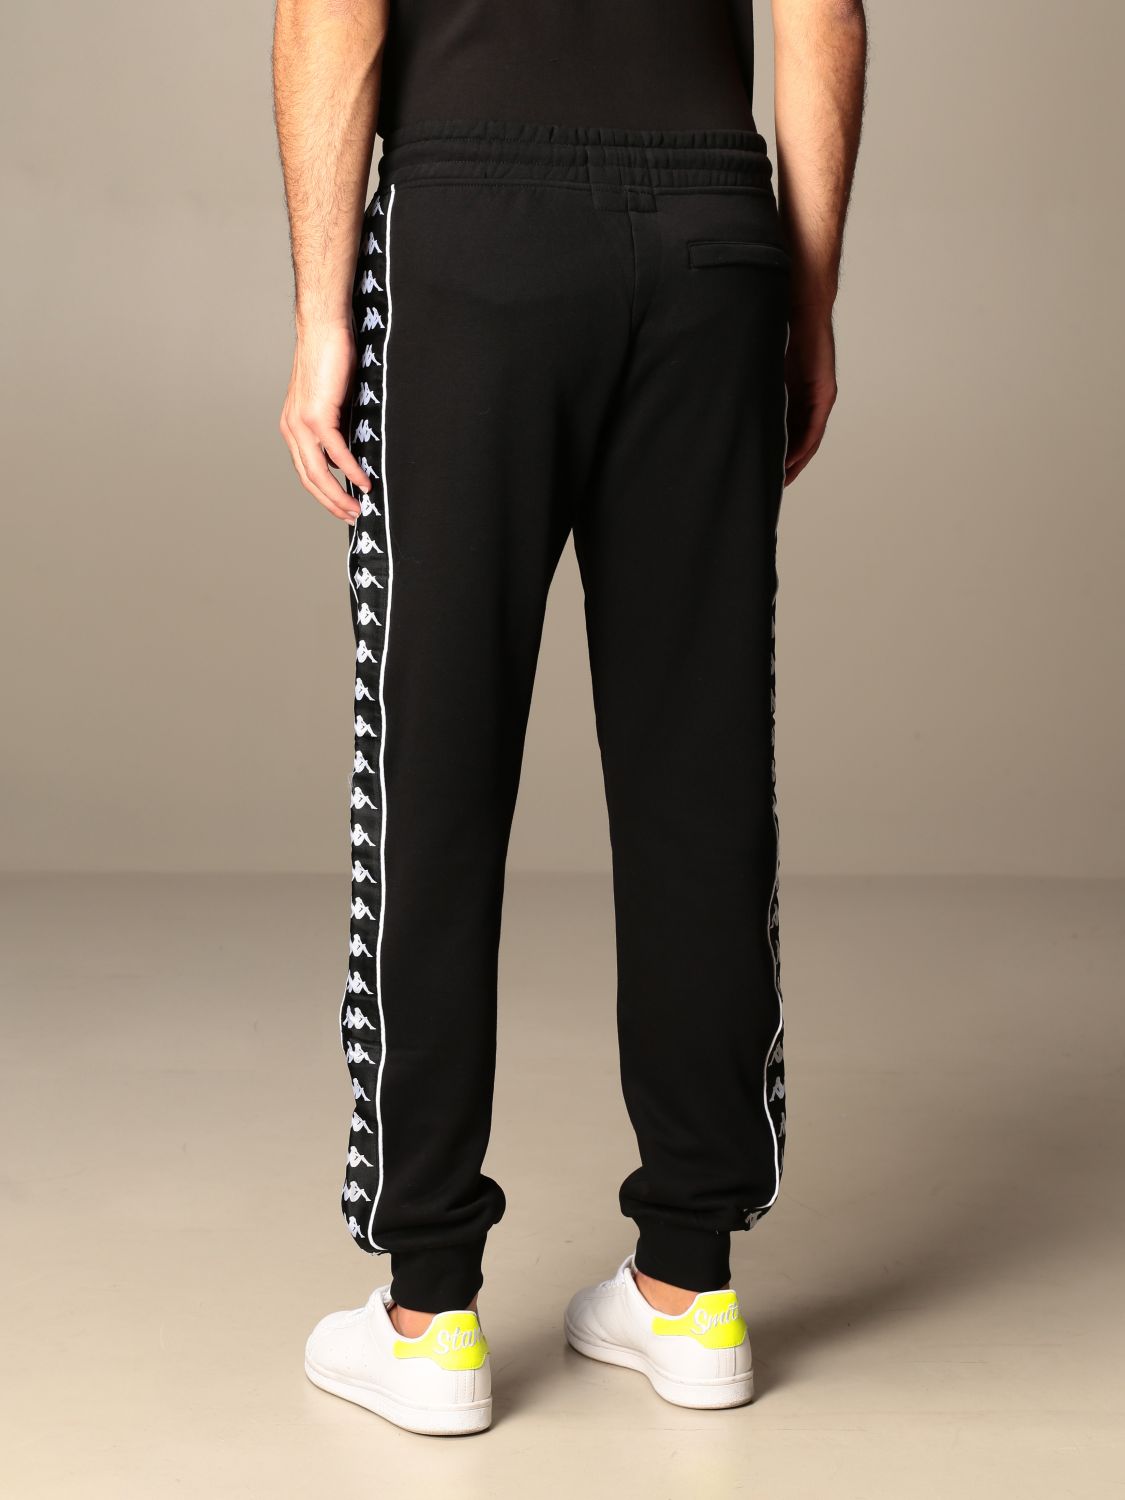 and interval helikopter KAPPA: jogging trousers with logoed bands - Black | Kappa pants 304KPN0  online at GIGLIO.COM